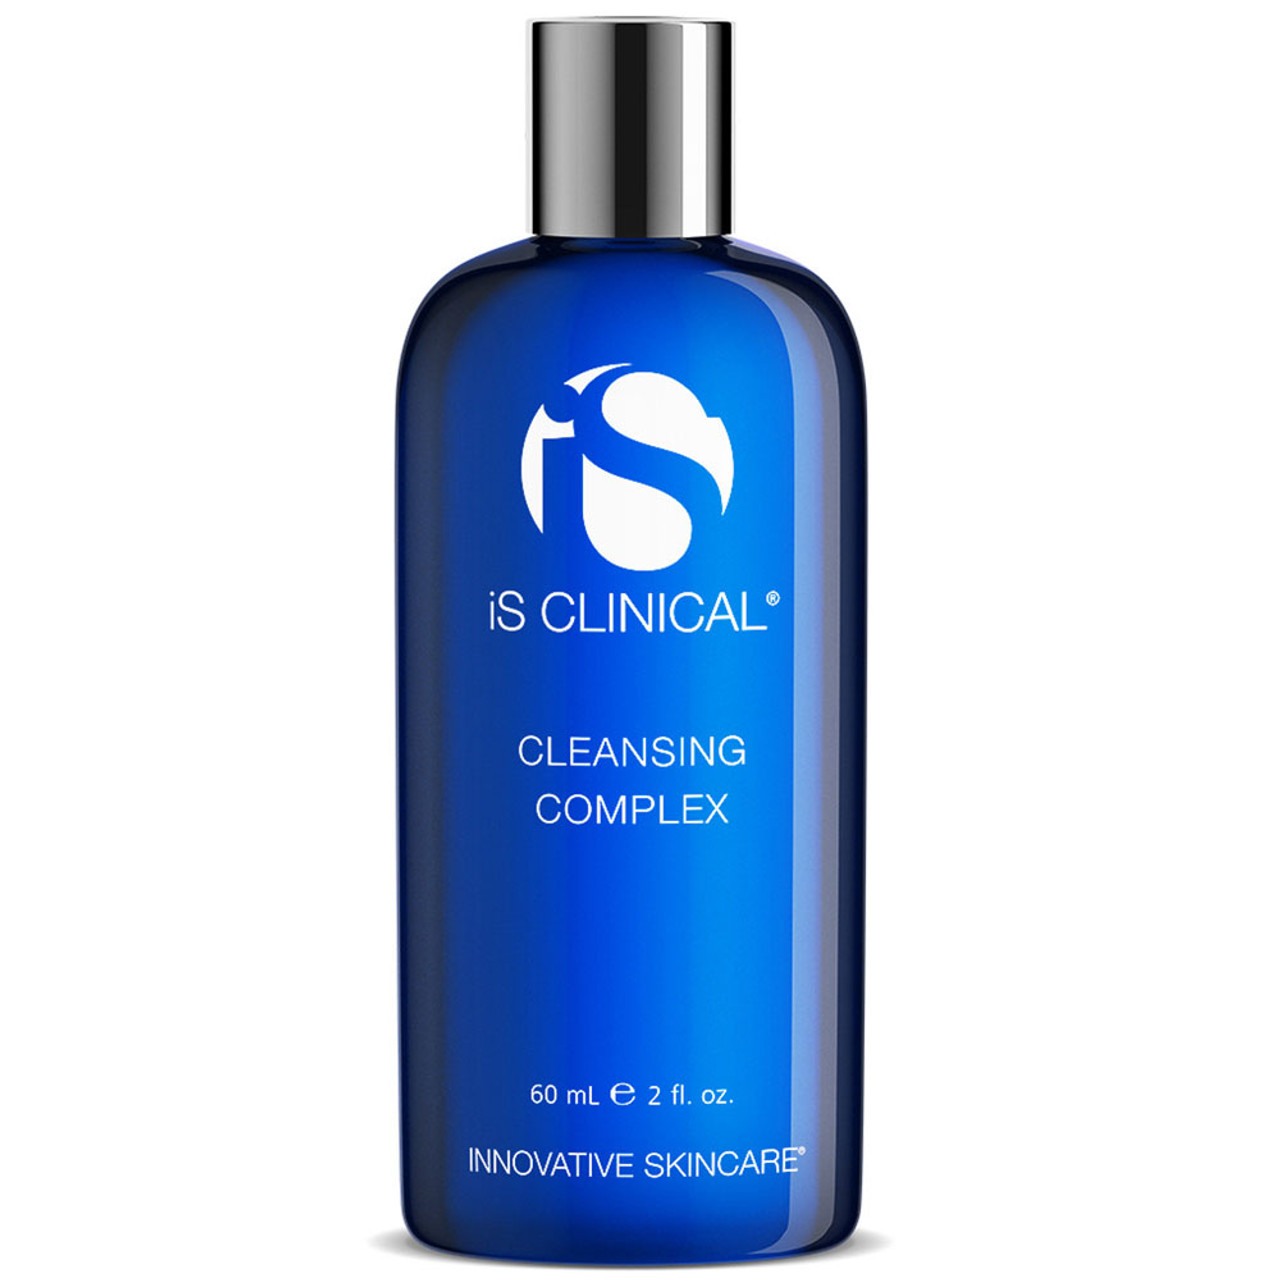 iS Clinical Cleansing Complex 2.0 oz